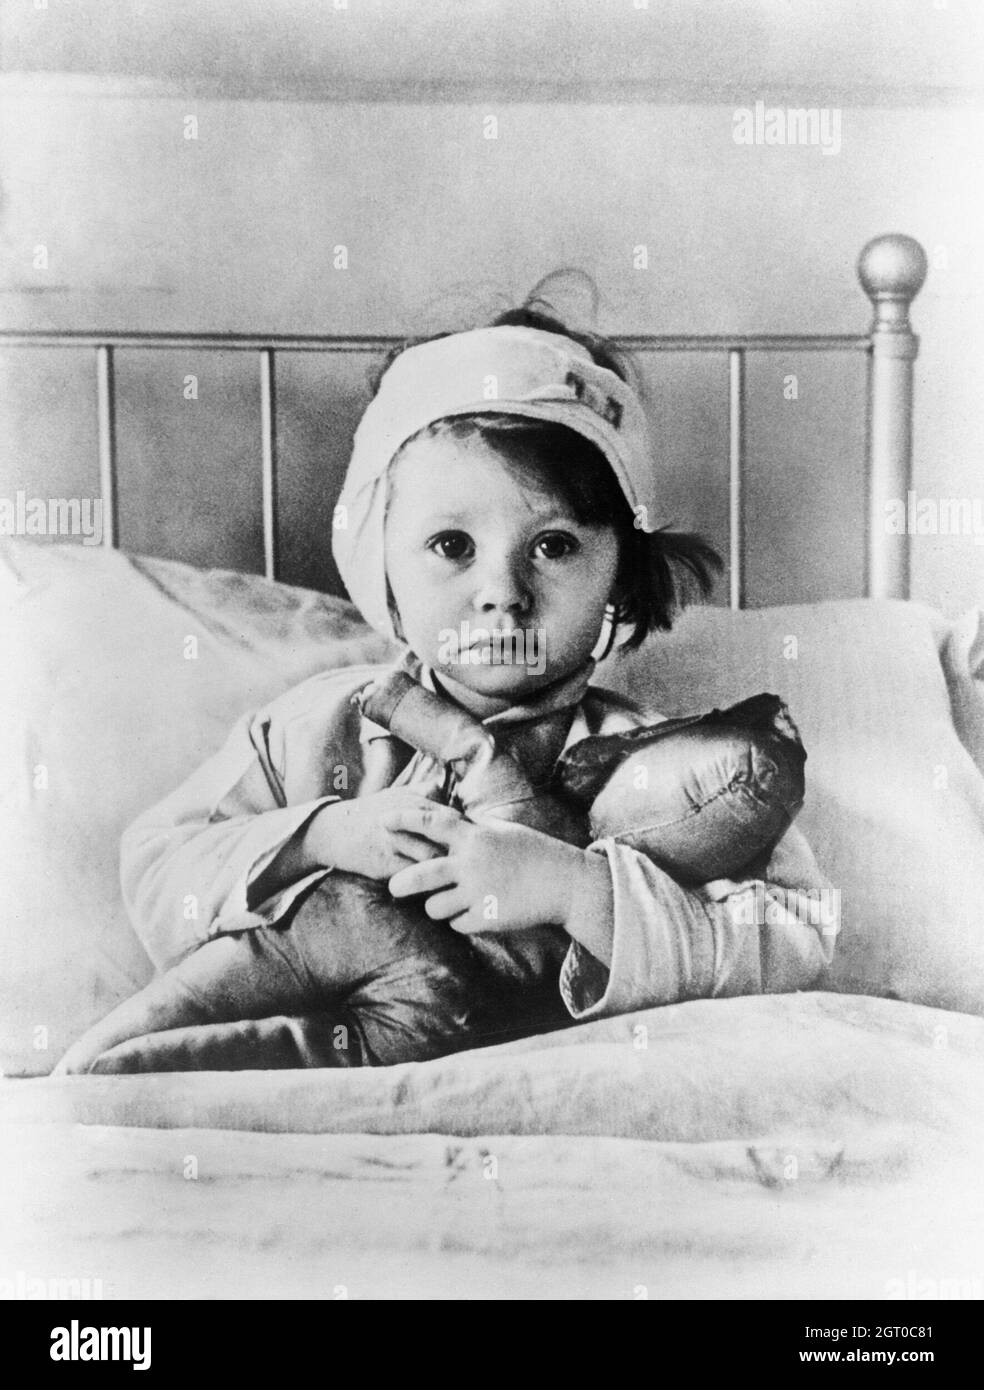 Eileen Dunne, aged three, sits in bed with her doll at Great Ormond Street Hospital for Sick Children, after being injured during an air raid on London in September 1940. Photo by Cecil Beaton Stock Photo